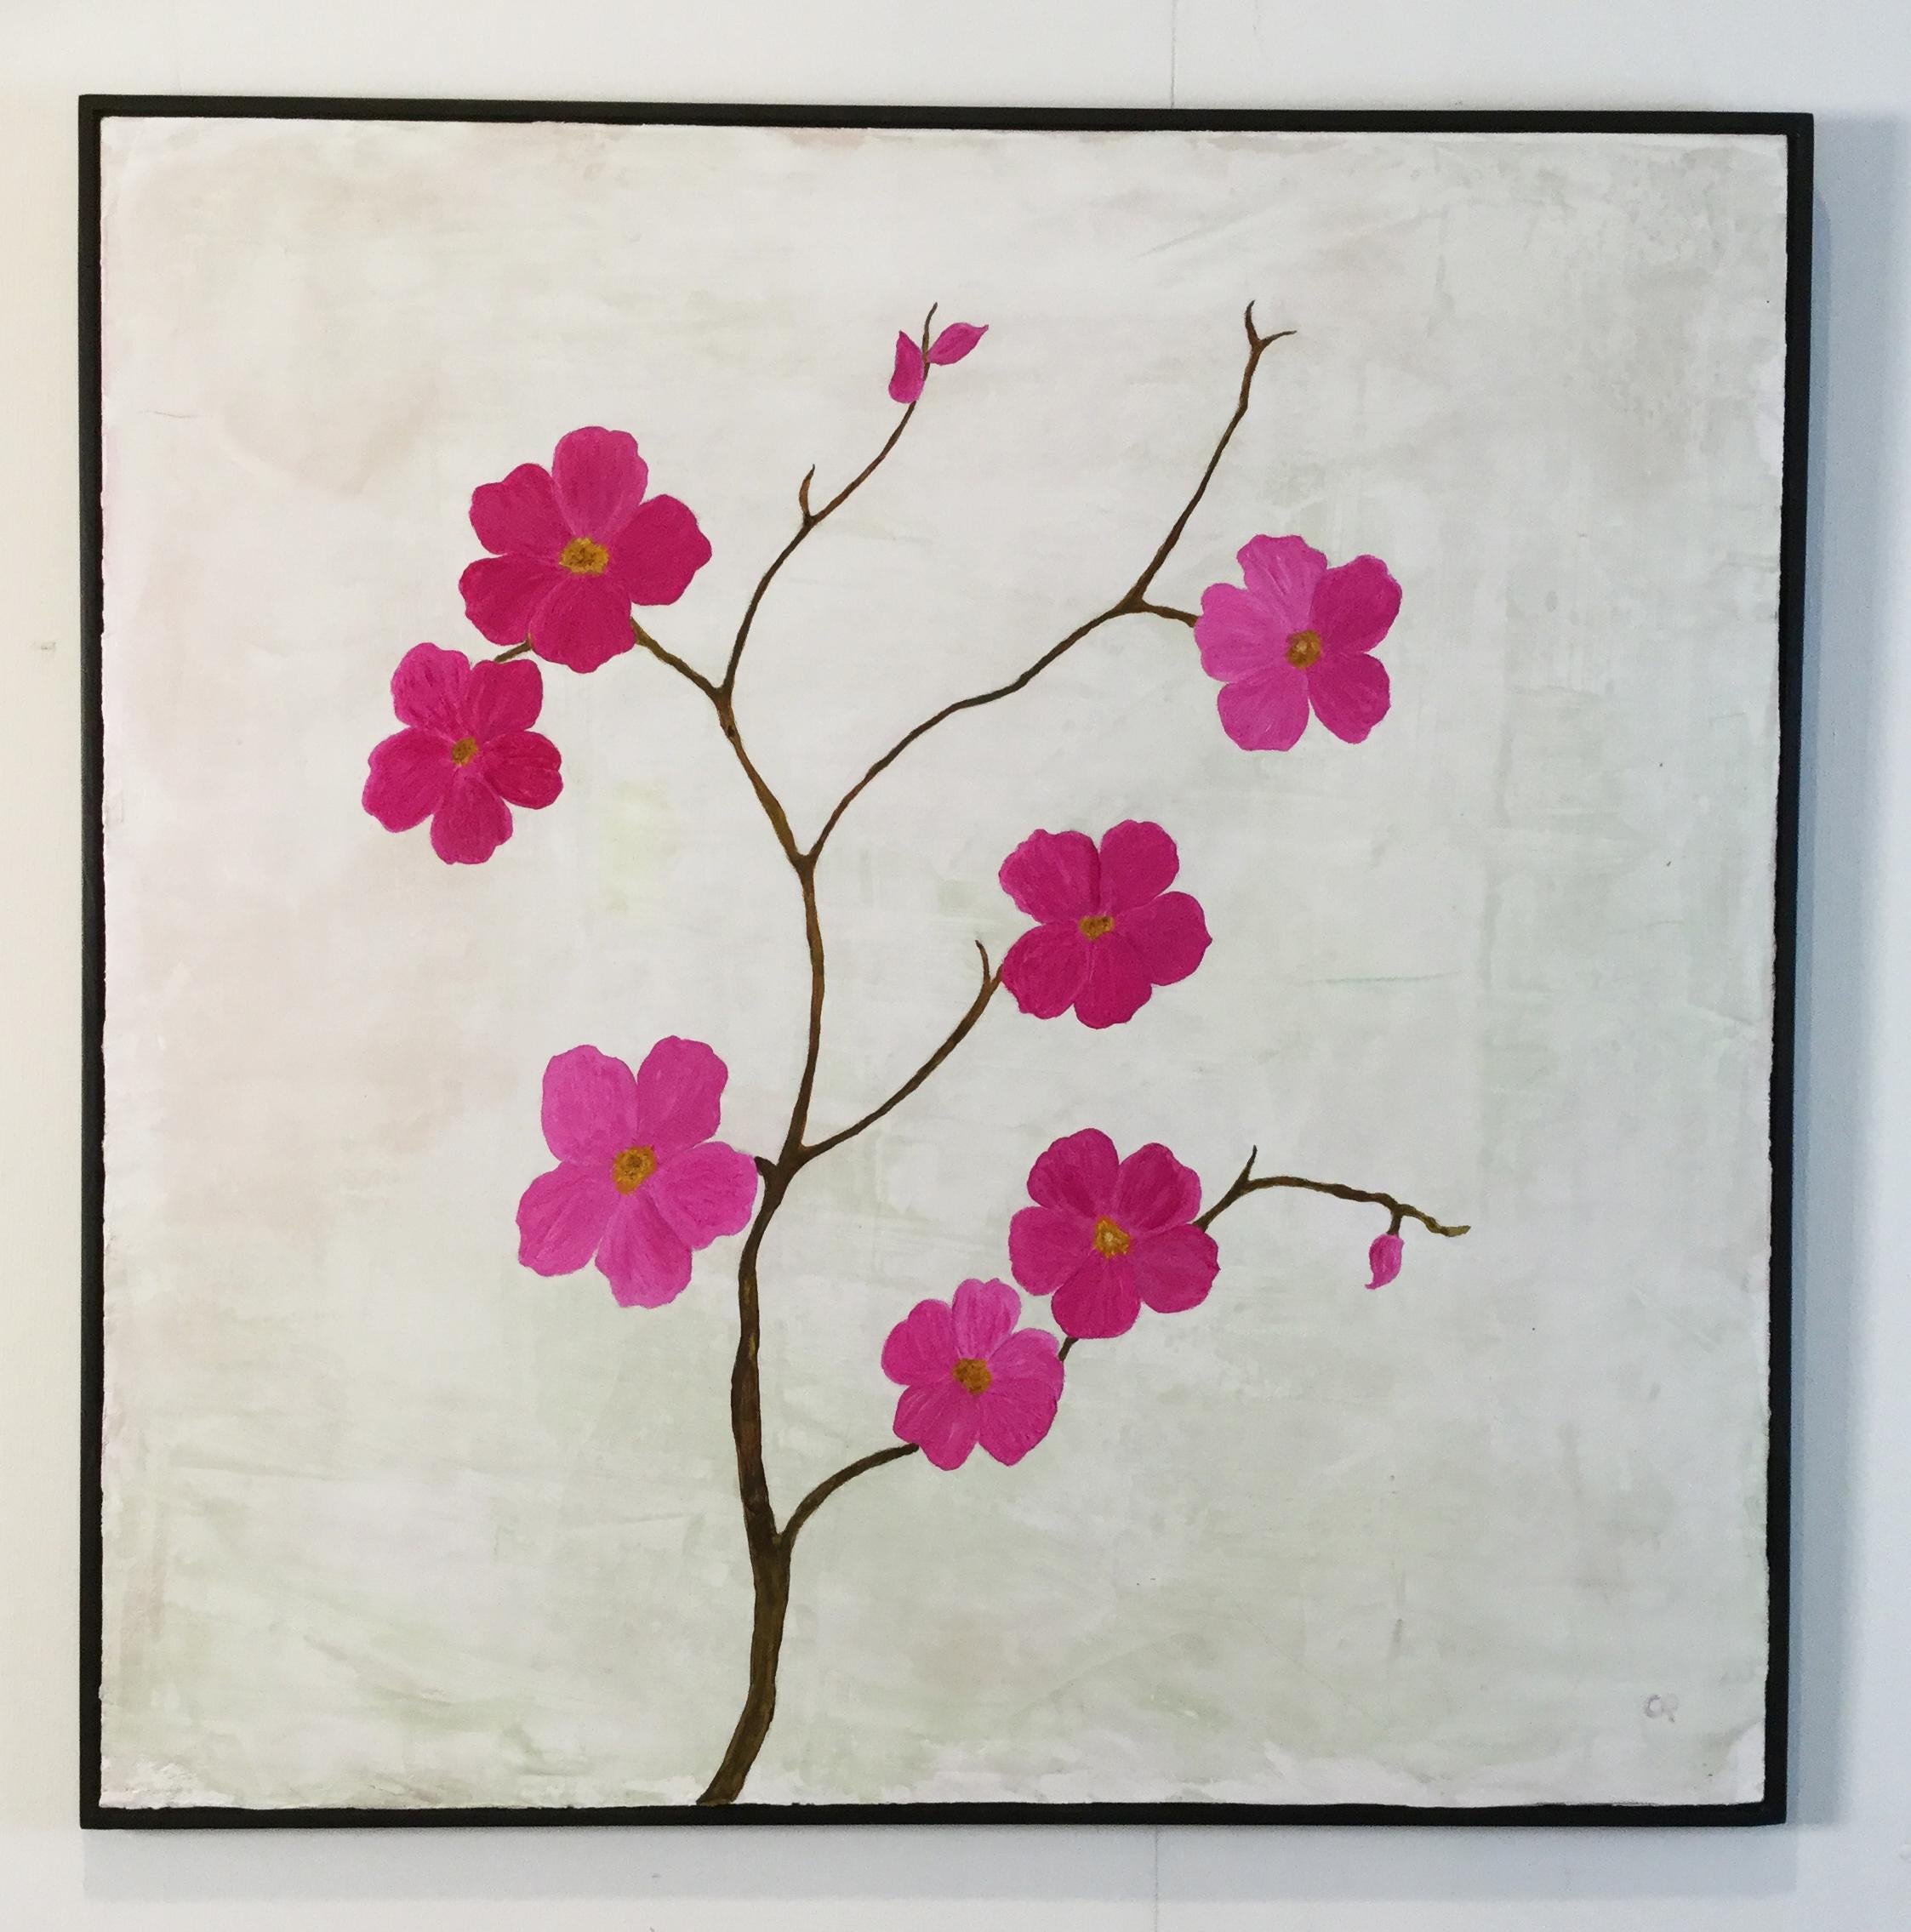 The beauty of the blossoms in the painting is enhanced by the layers of Venetian plaster and layers of acrylic paint. Each are 25